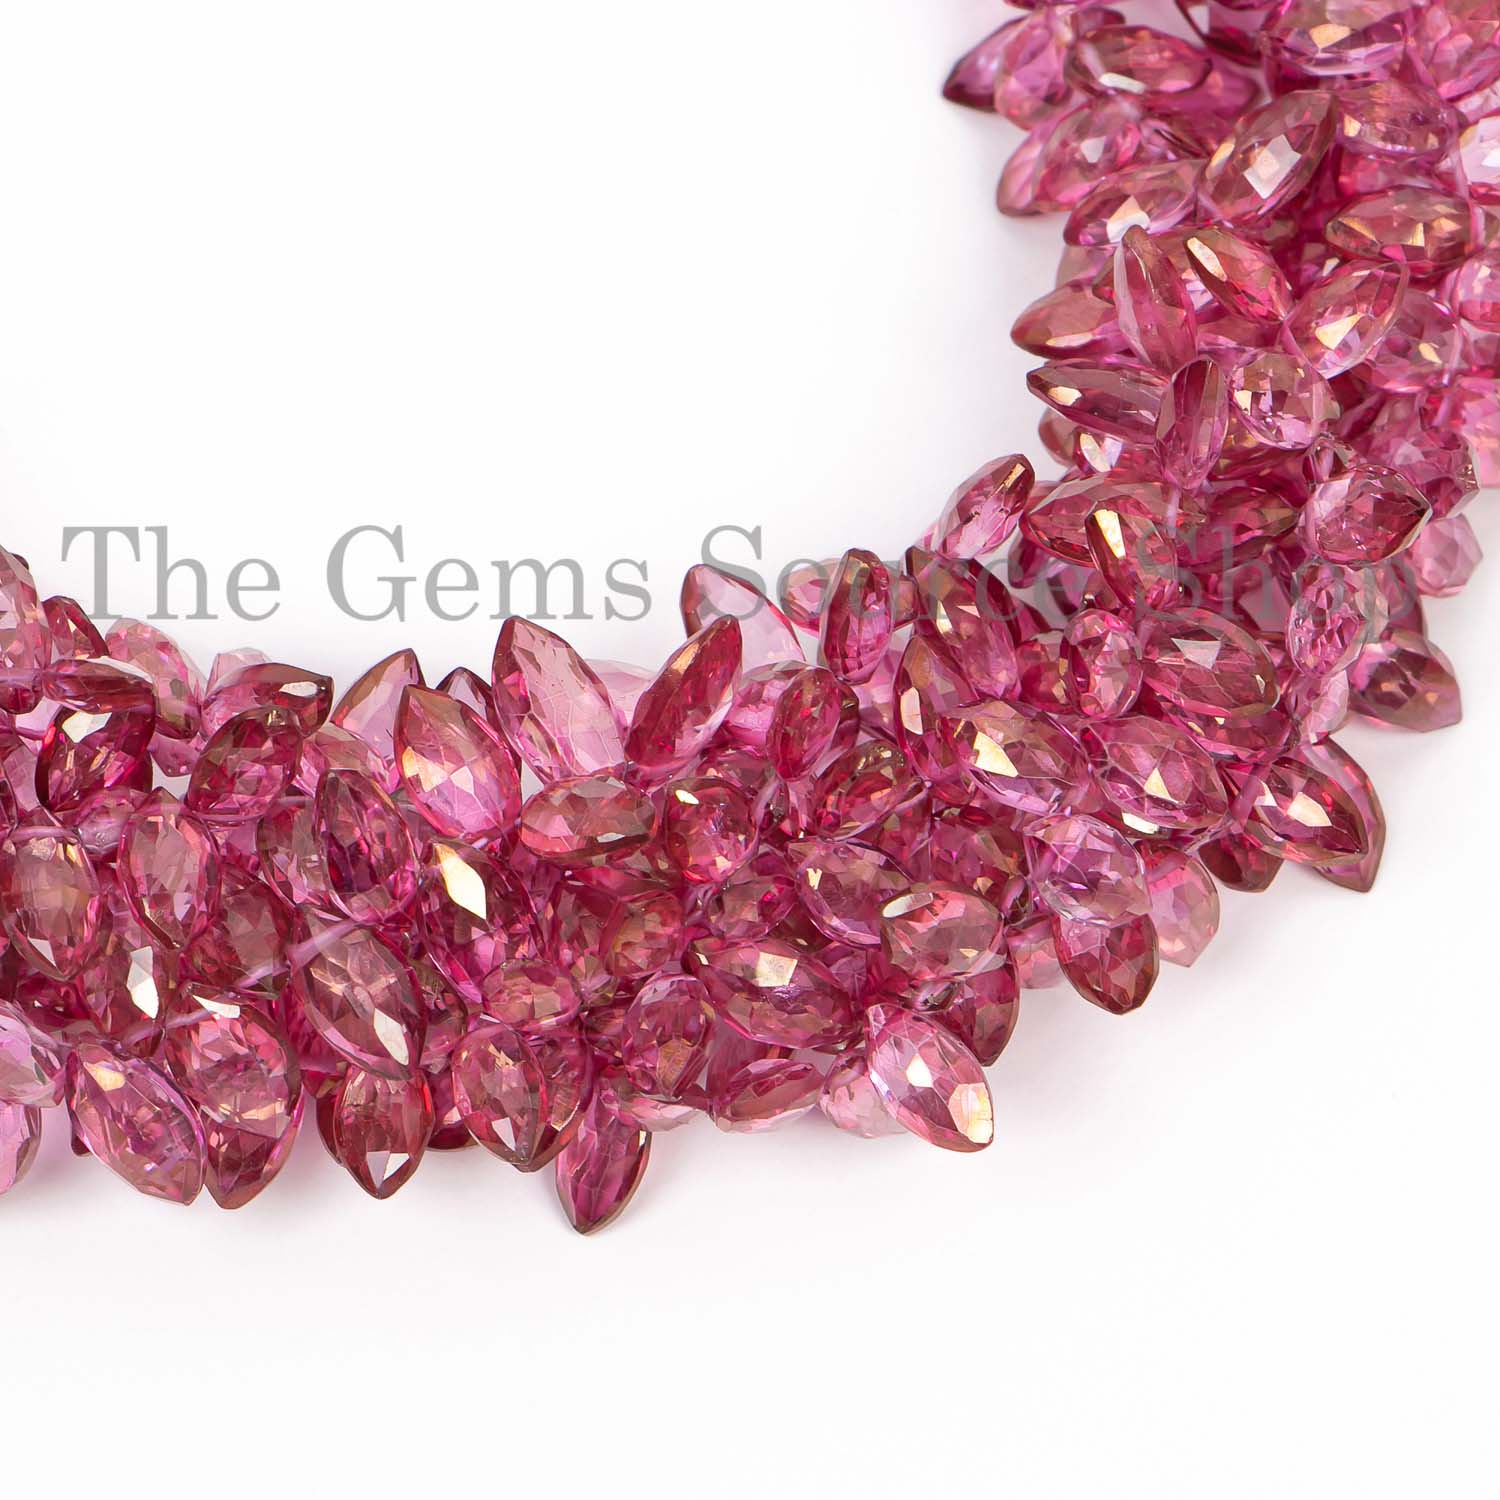 Pink Mystic Topaz Faceted Marquise Shape Briolette, Wholesale Gemstone Beads, Loose Beads